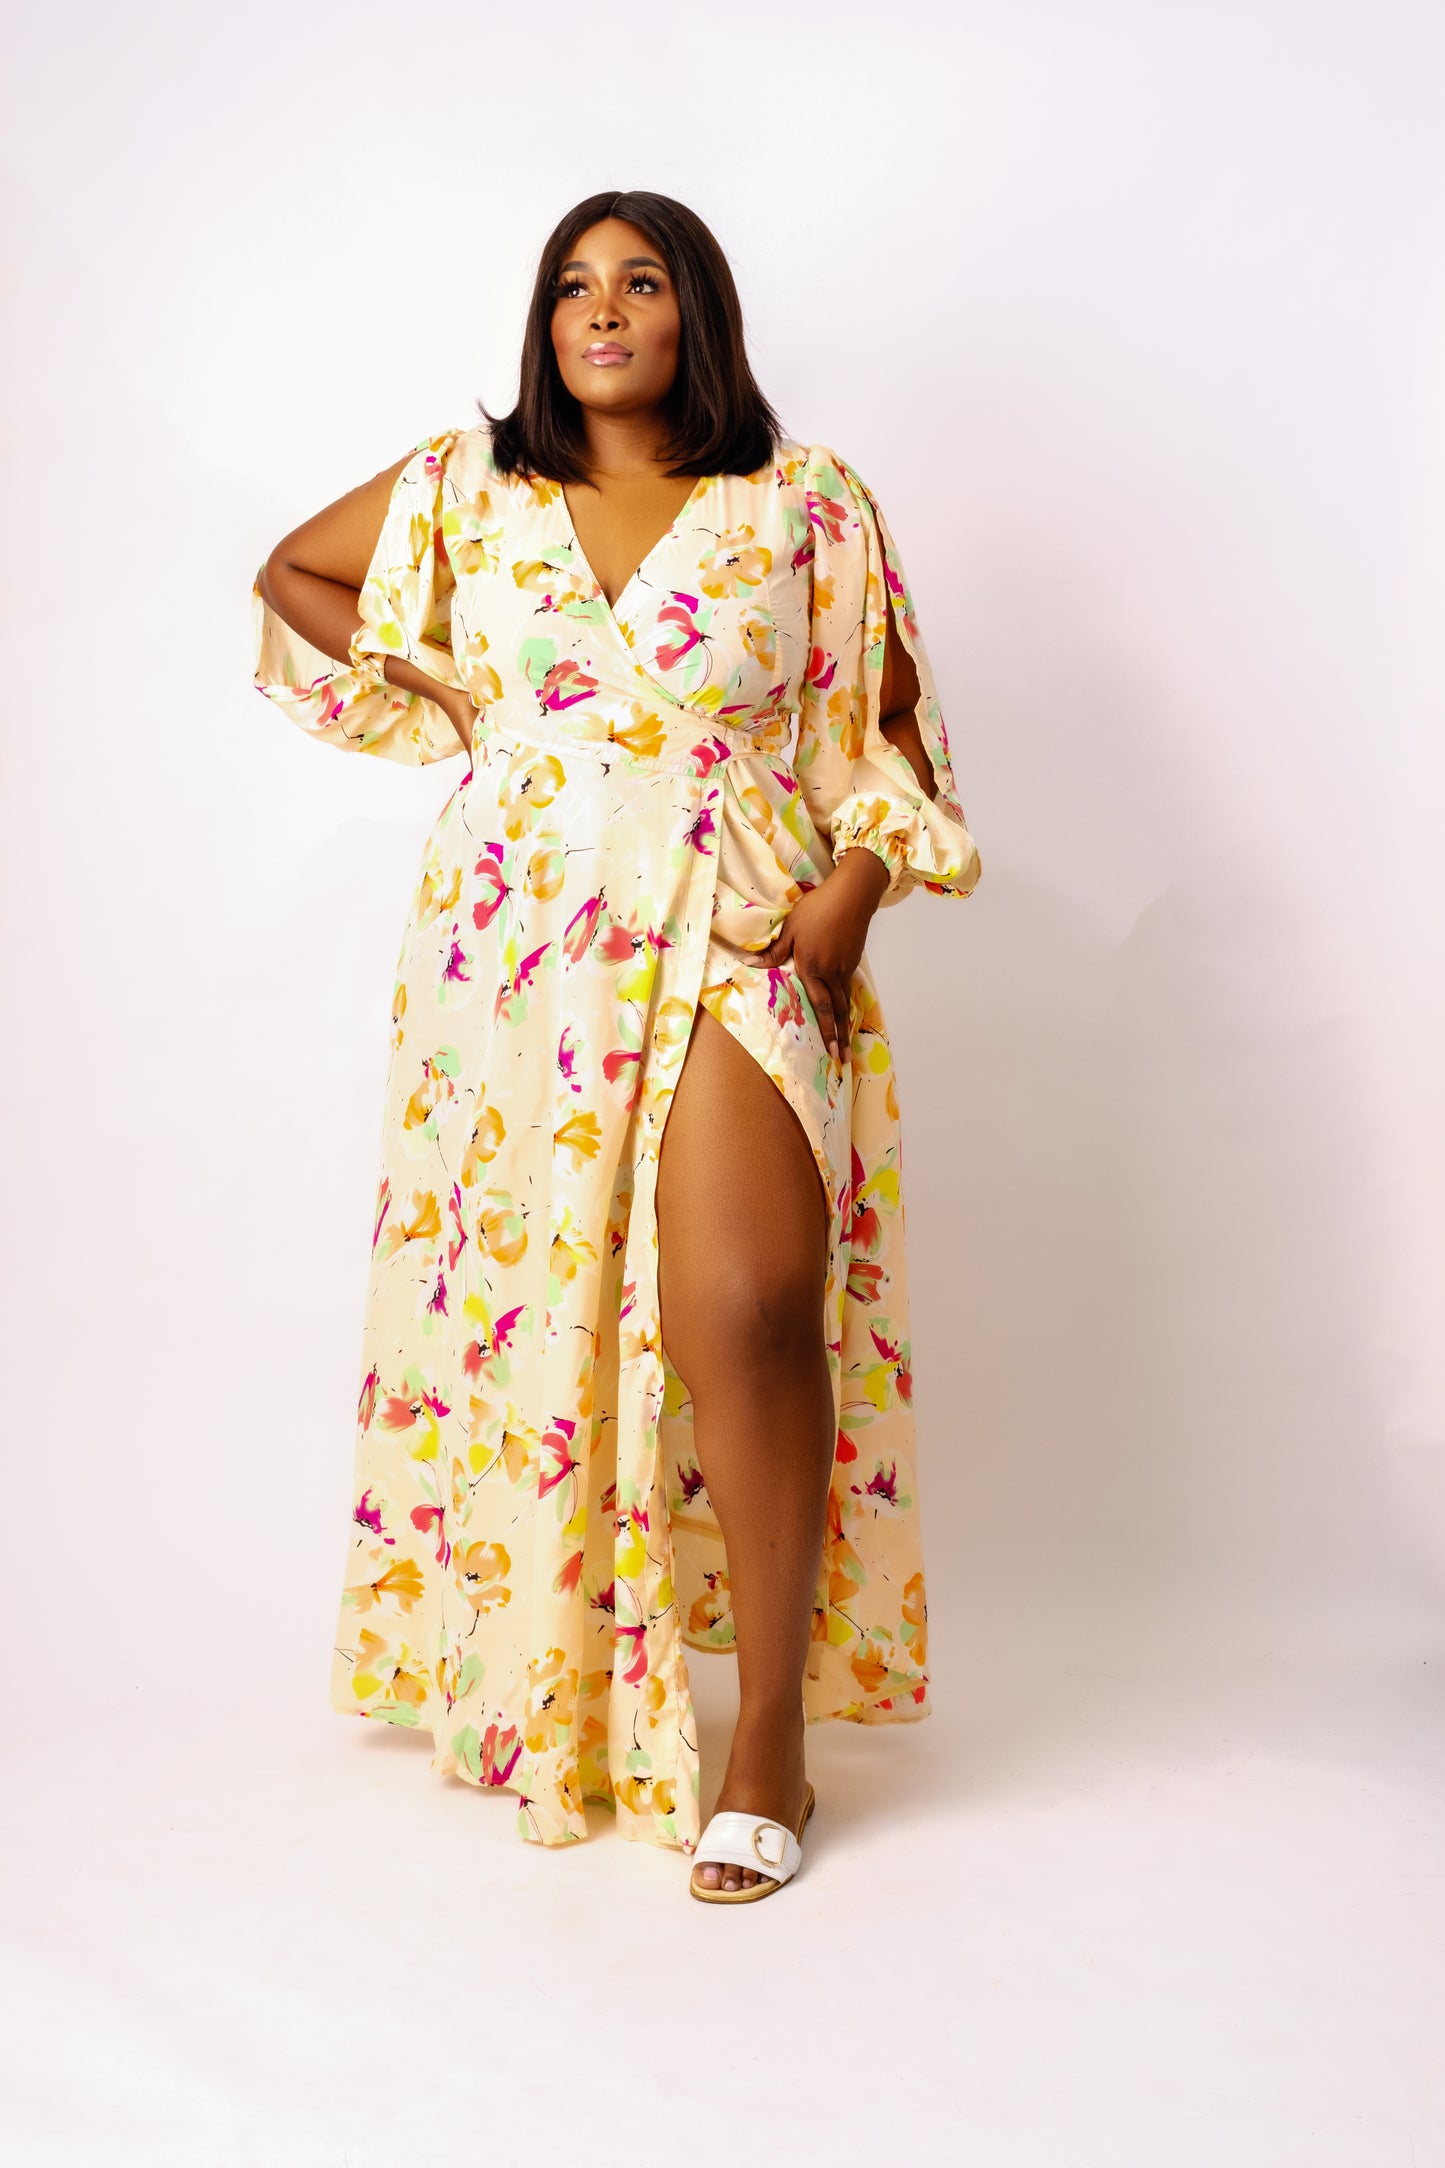 Peach light chiffon floral long/maxi wrap dress featuring a V-neckline and long split sleeves.